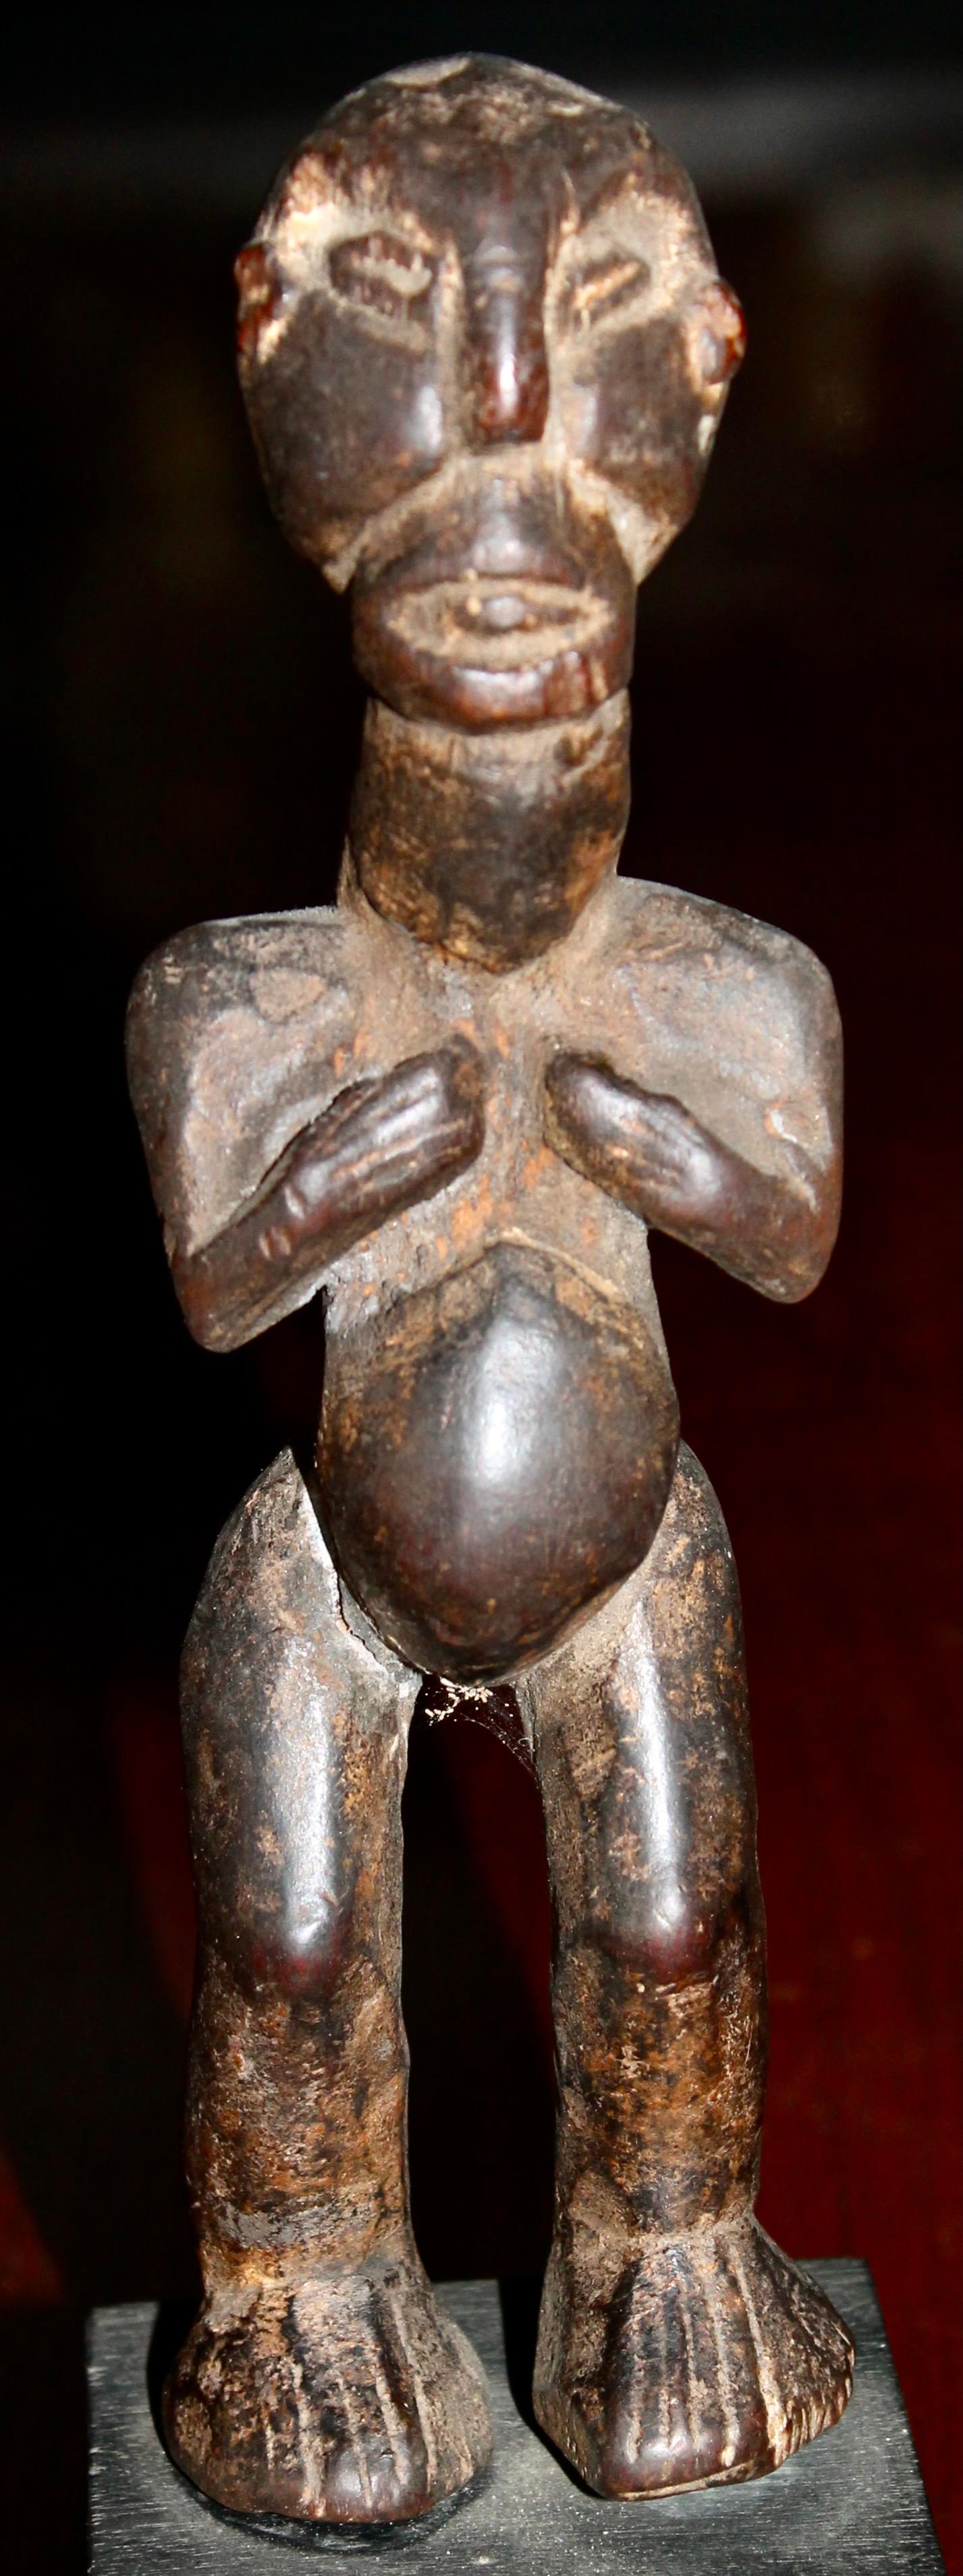 20th Century Small Cameroon Bangwa Figure Ex Egon Guenther Collection Sothebys